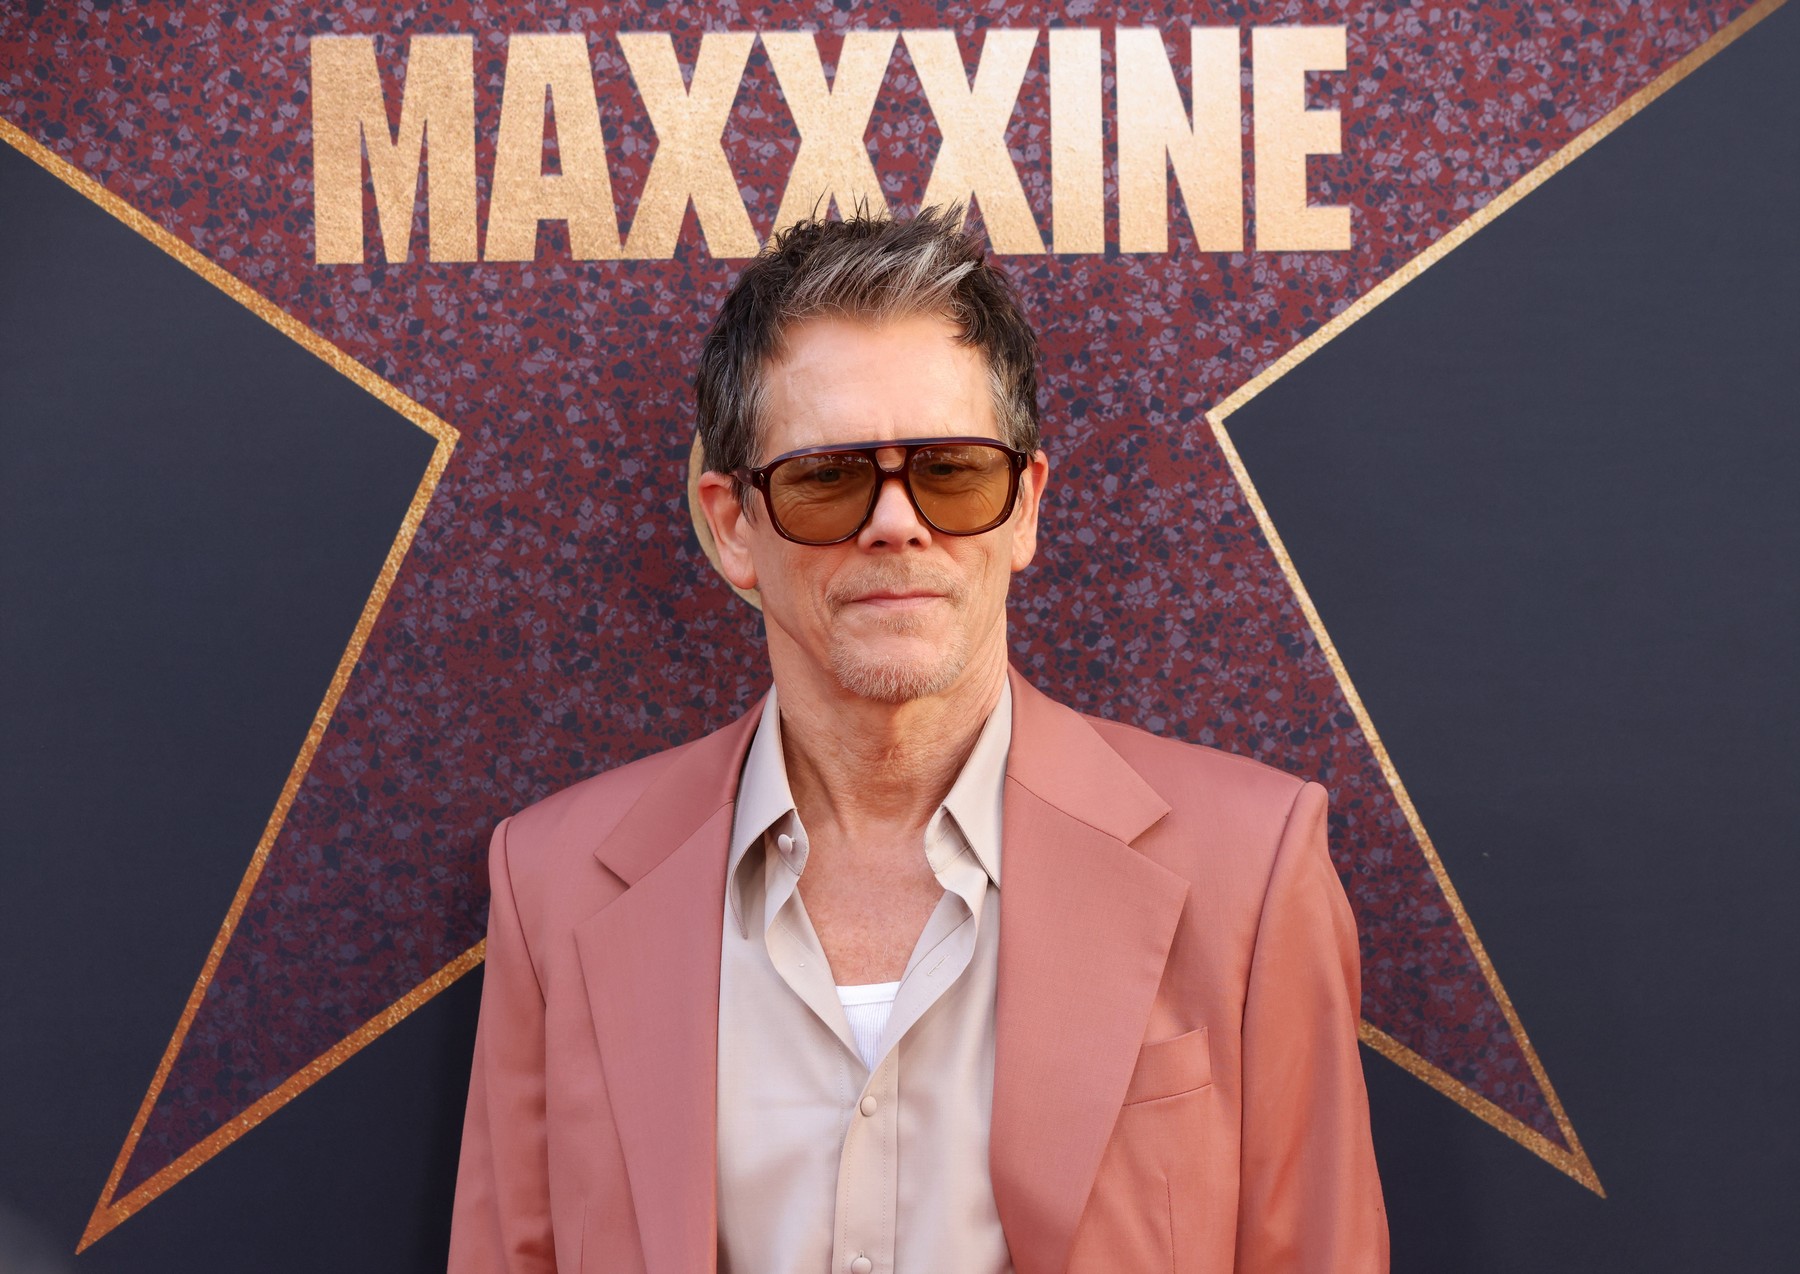 Cast member Kevin Bacon attends the premiere of the horror motion picture "MaXXXine" at the TCL Chinese Theatre in the Hollywood section of Los Angeles on Monday, June 24, 2024. Storyline: In 1980s Hollywood, adult film star and aspiring actress Maxine Minx finally gets her big break. But as a mysterious killer stalks the starlets of Hollywood, a trail of blood threatens to reveal her sinister past. Photo by /UPI,Image: 884453547, License: Rights-managed, Restrictions: , Model Release: no, Credit line: GREG GRUDT / UPI / Profimedia